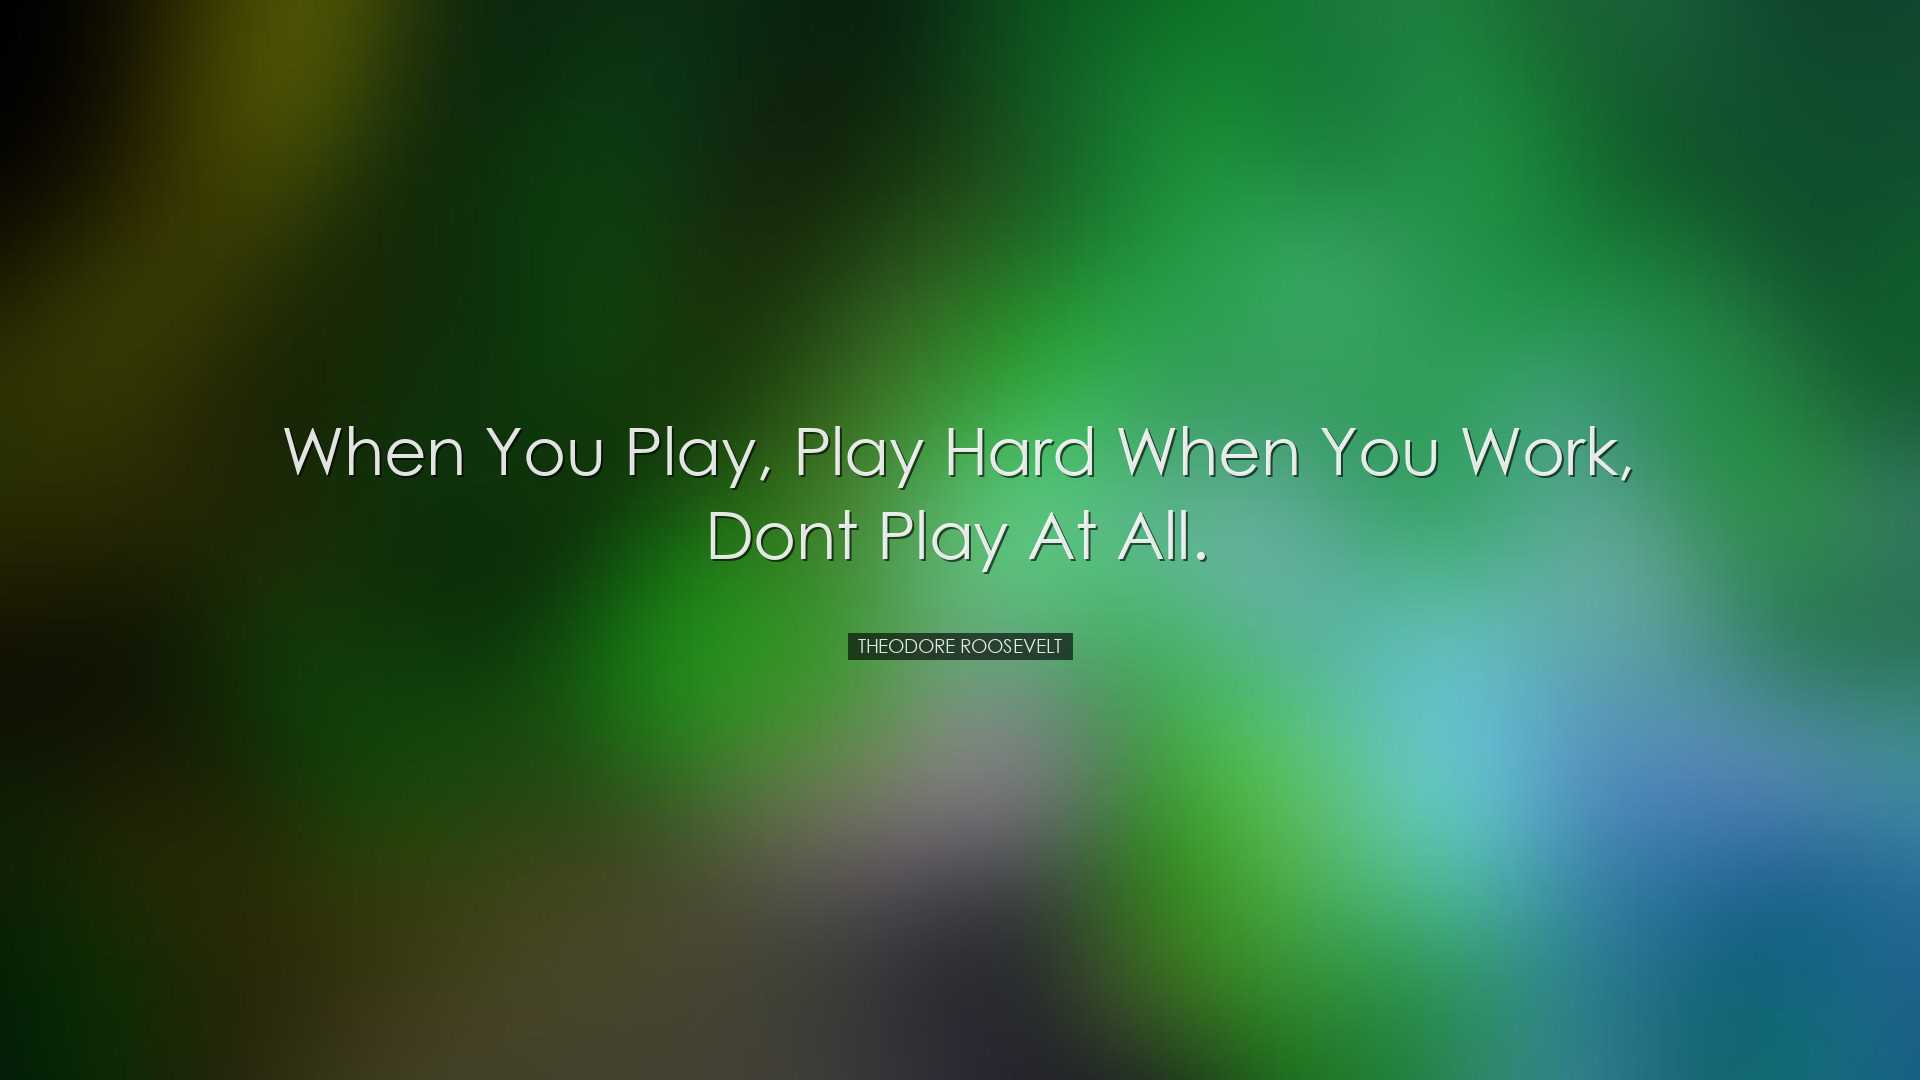 When you play, play hard when you work, dont play at all. - Theodo